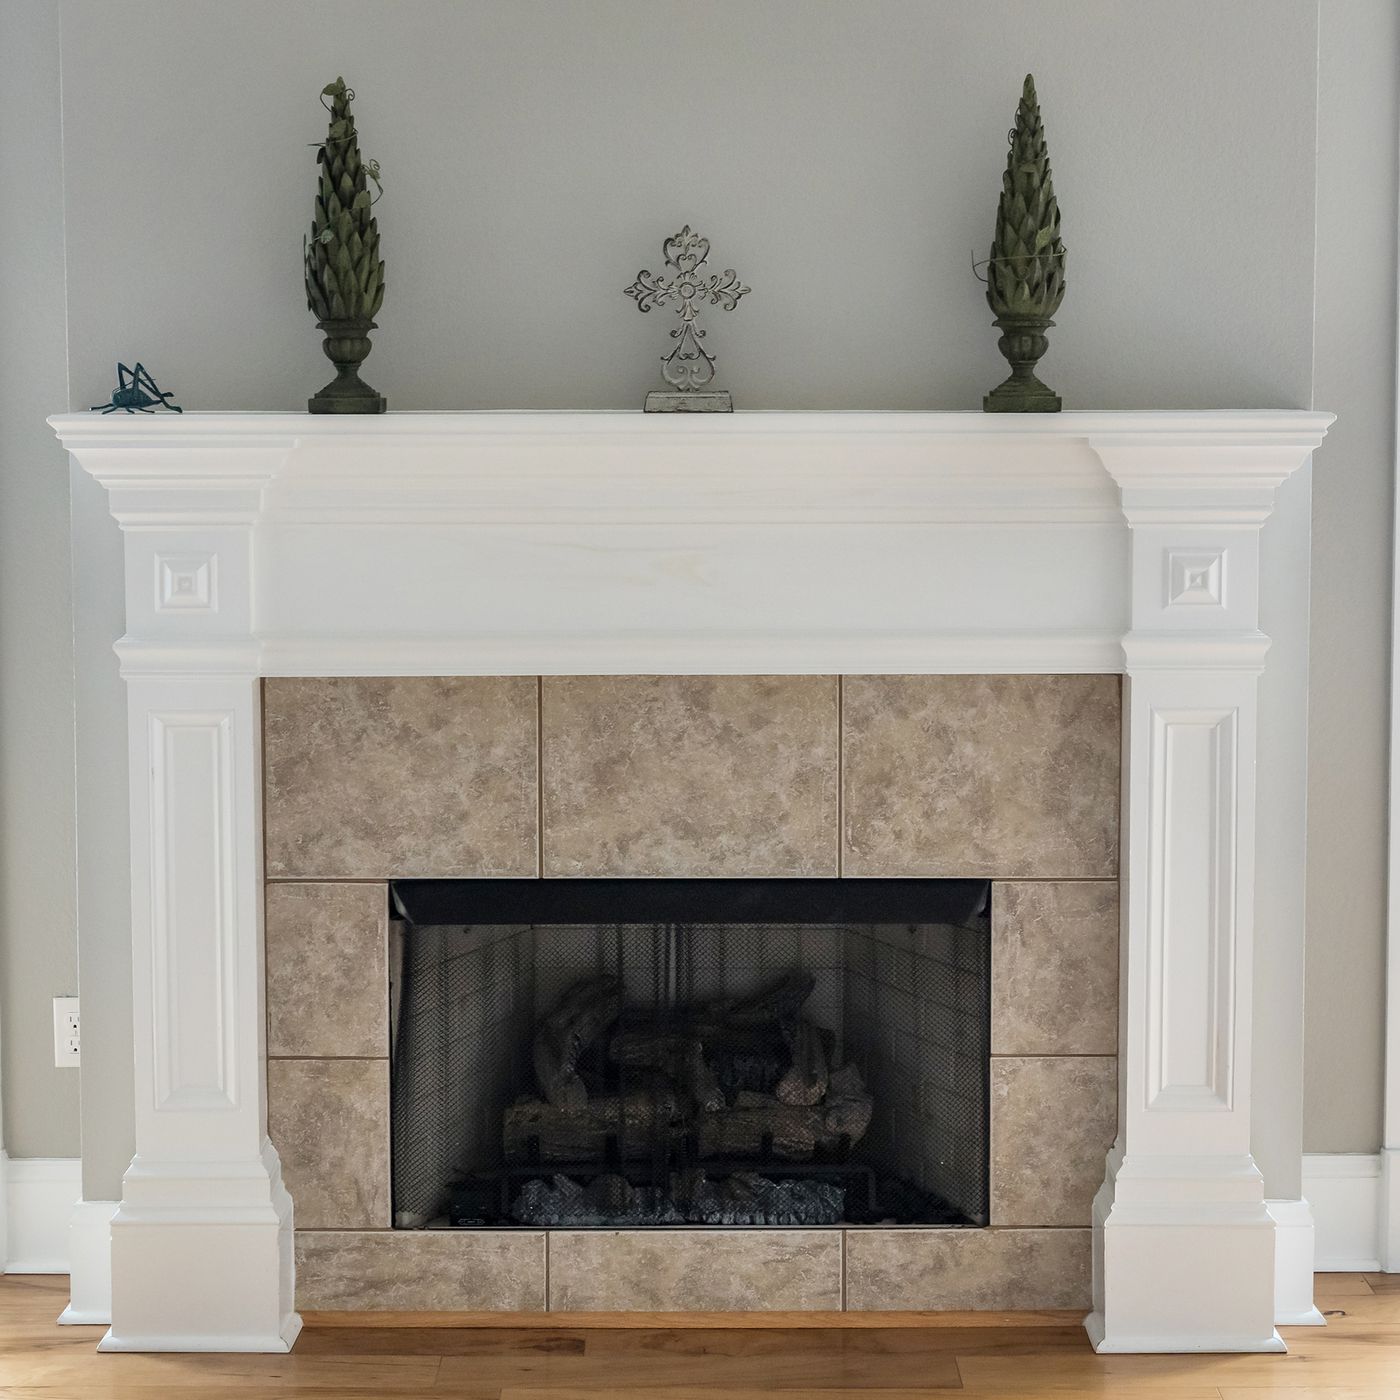 How to Build a Fireplace Surround 